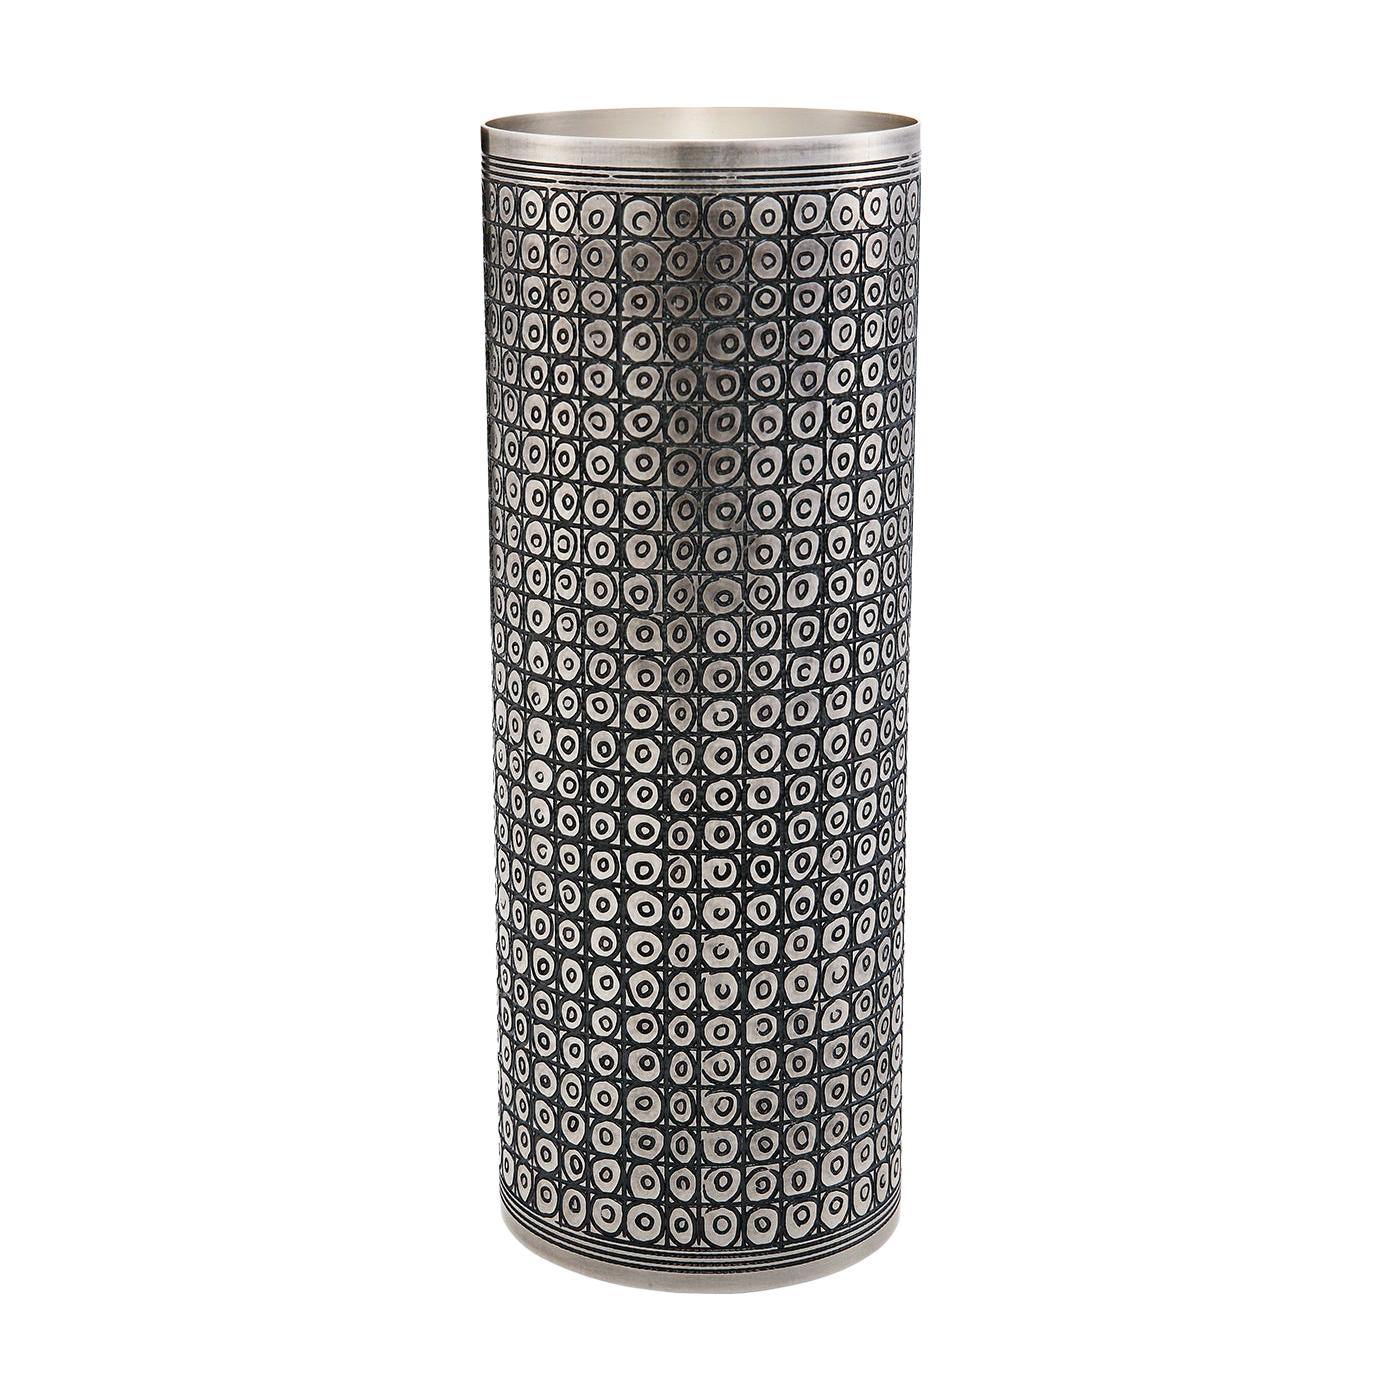 Sumer Silver Vase by Zanetto For Sale